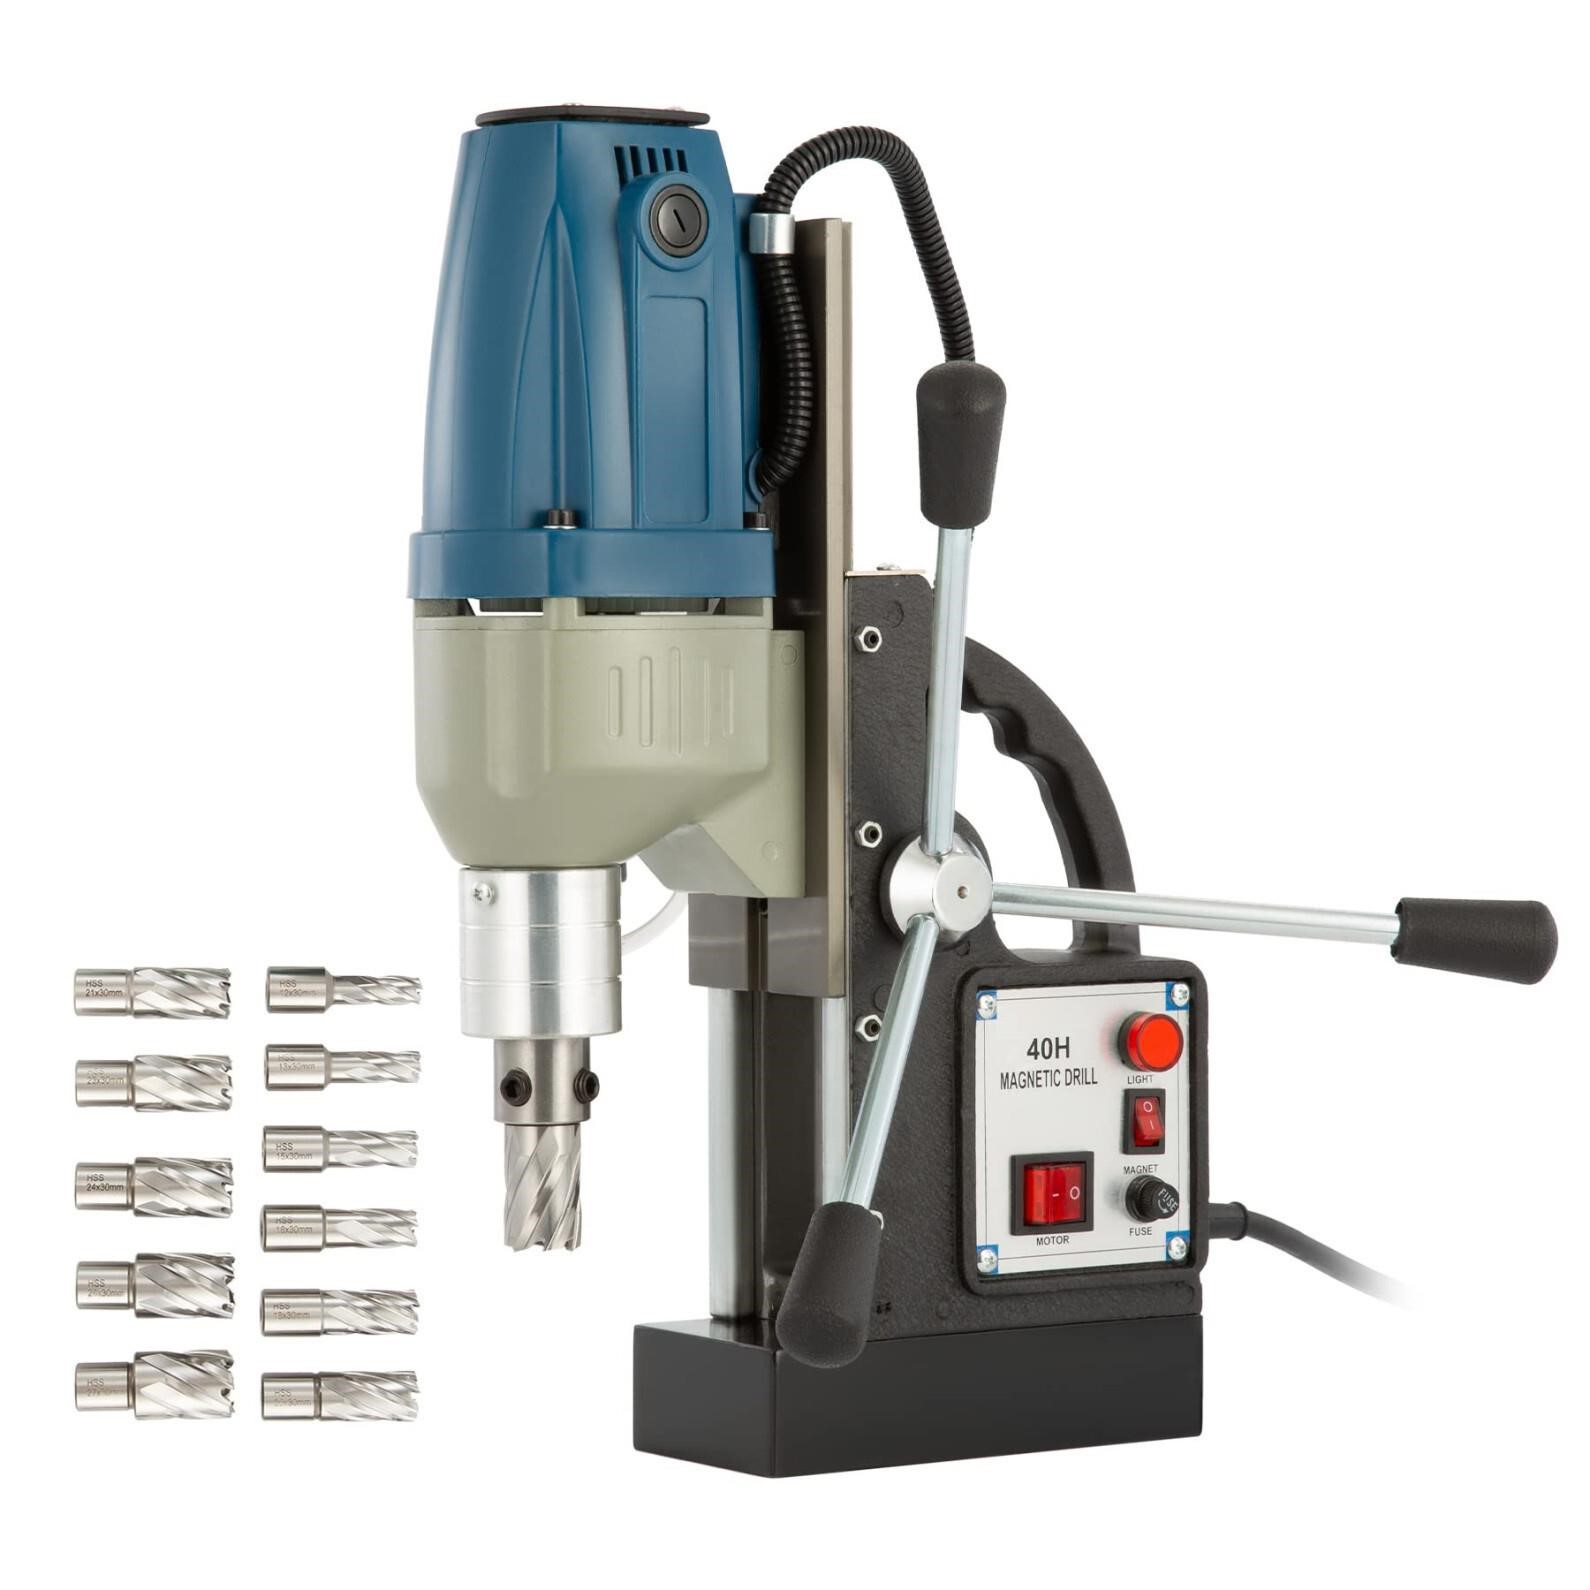 ZELCAN 1550W Electric Magnetic Drill Press w 1.6